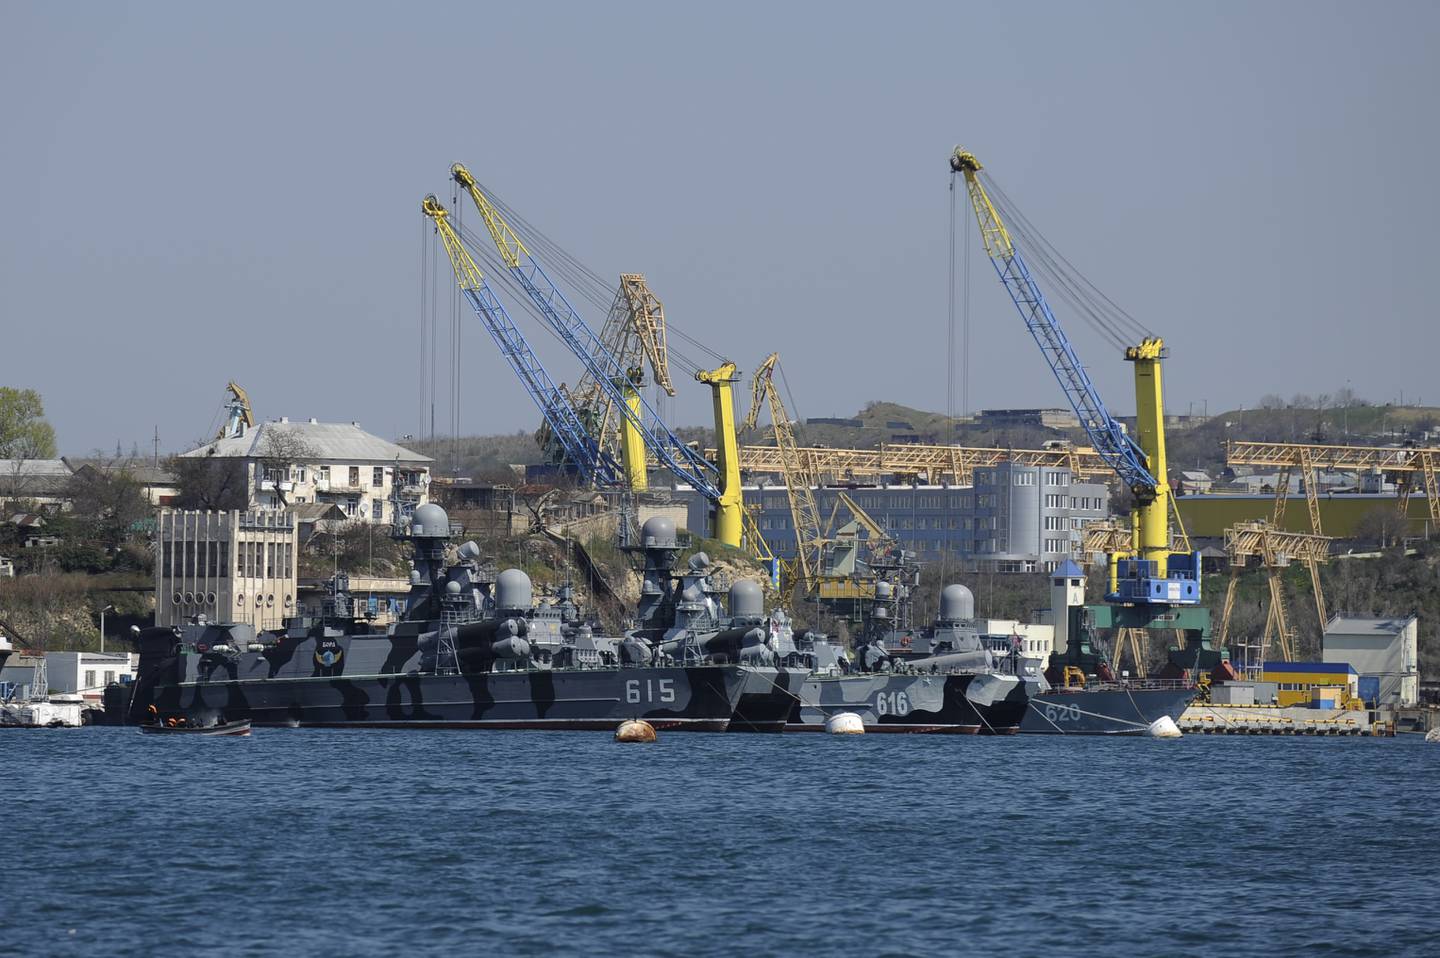 Russian Black Sea fleet ships are anchored in one of the bays of Sevastopol, Crimea, Monday, March 31, 2014. In Moscow, the lower house of parliament voted unanimously Monday to annul agreements with Ukraine on Russia's navy base in Crimea. In 2010, Ukraine allowed Russia to extend the lease of the fleet's base until 2042 on an annual rent of $98 million and price discounts for Russian natural gas supplies. (AP Photo/Andrew Lubimov)